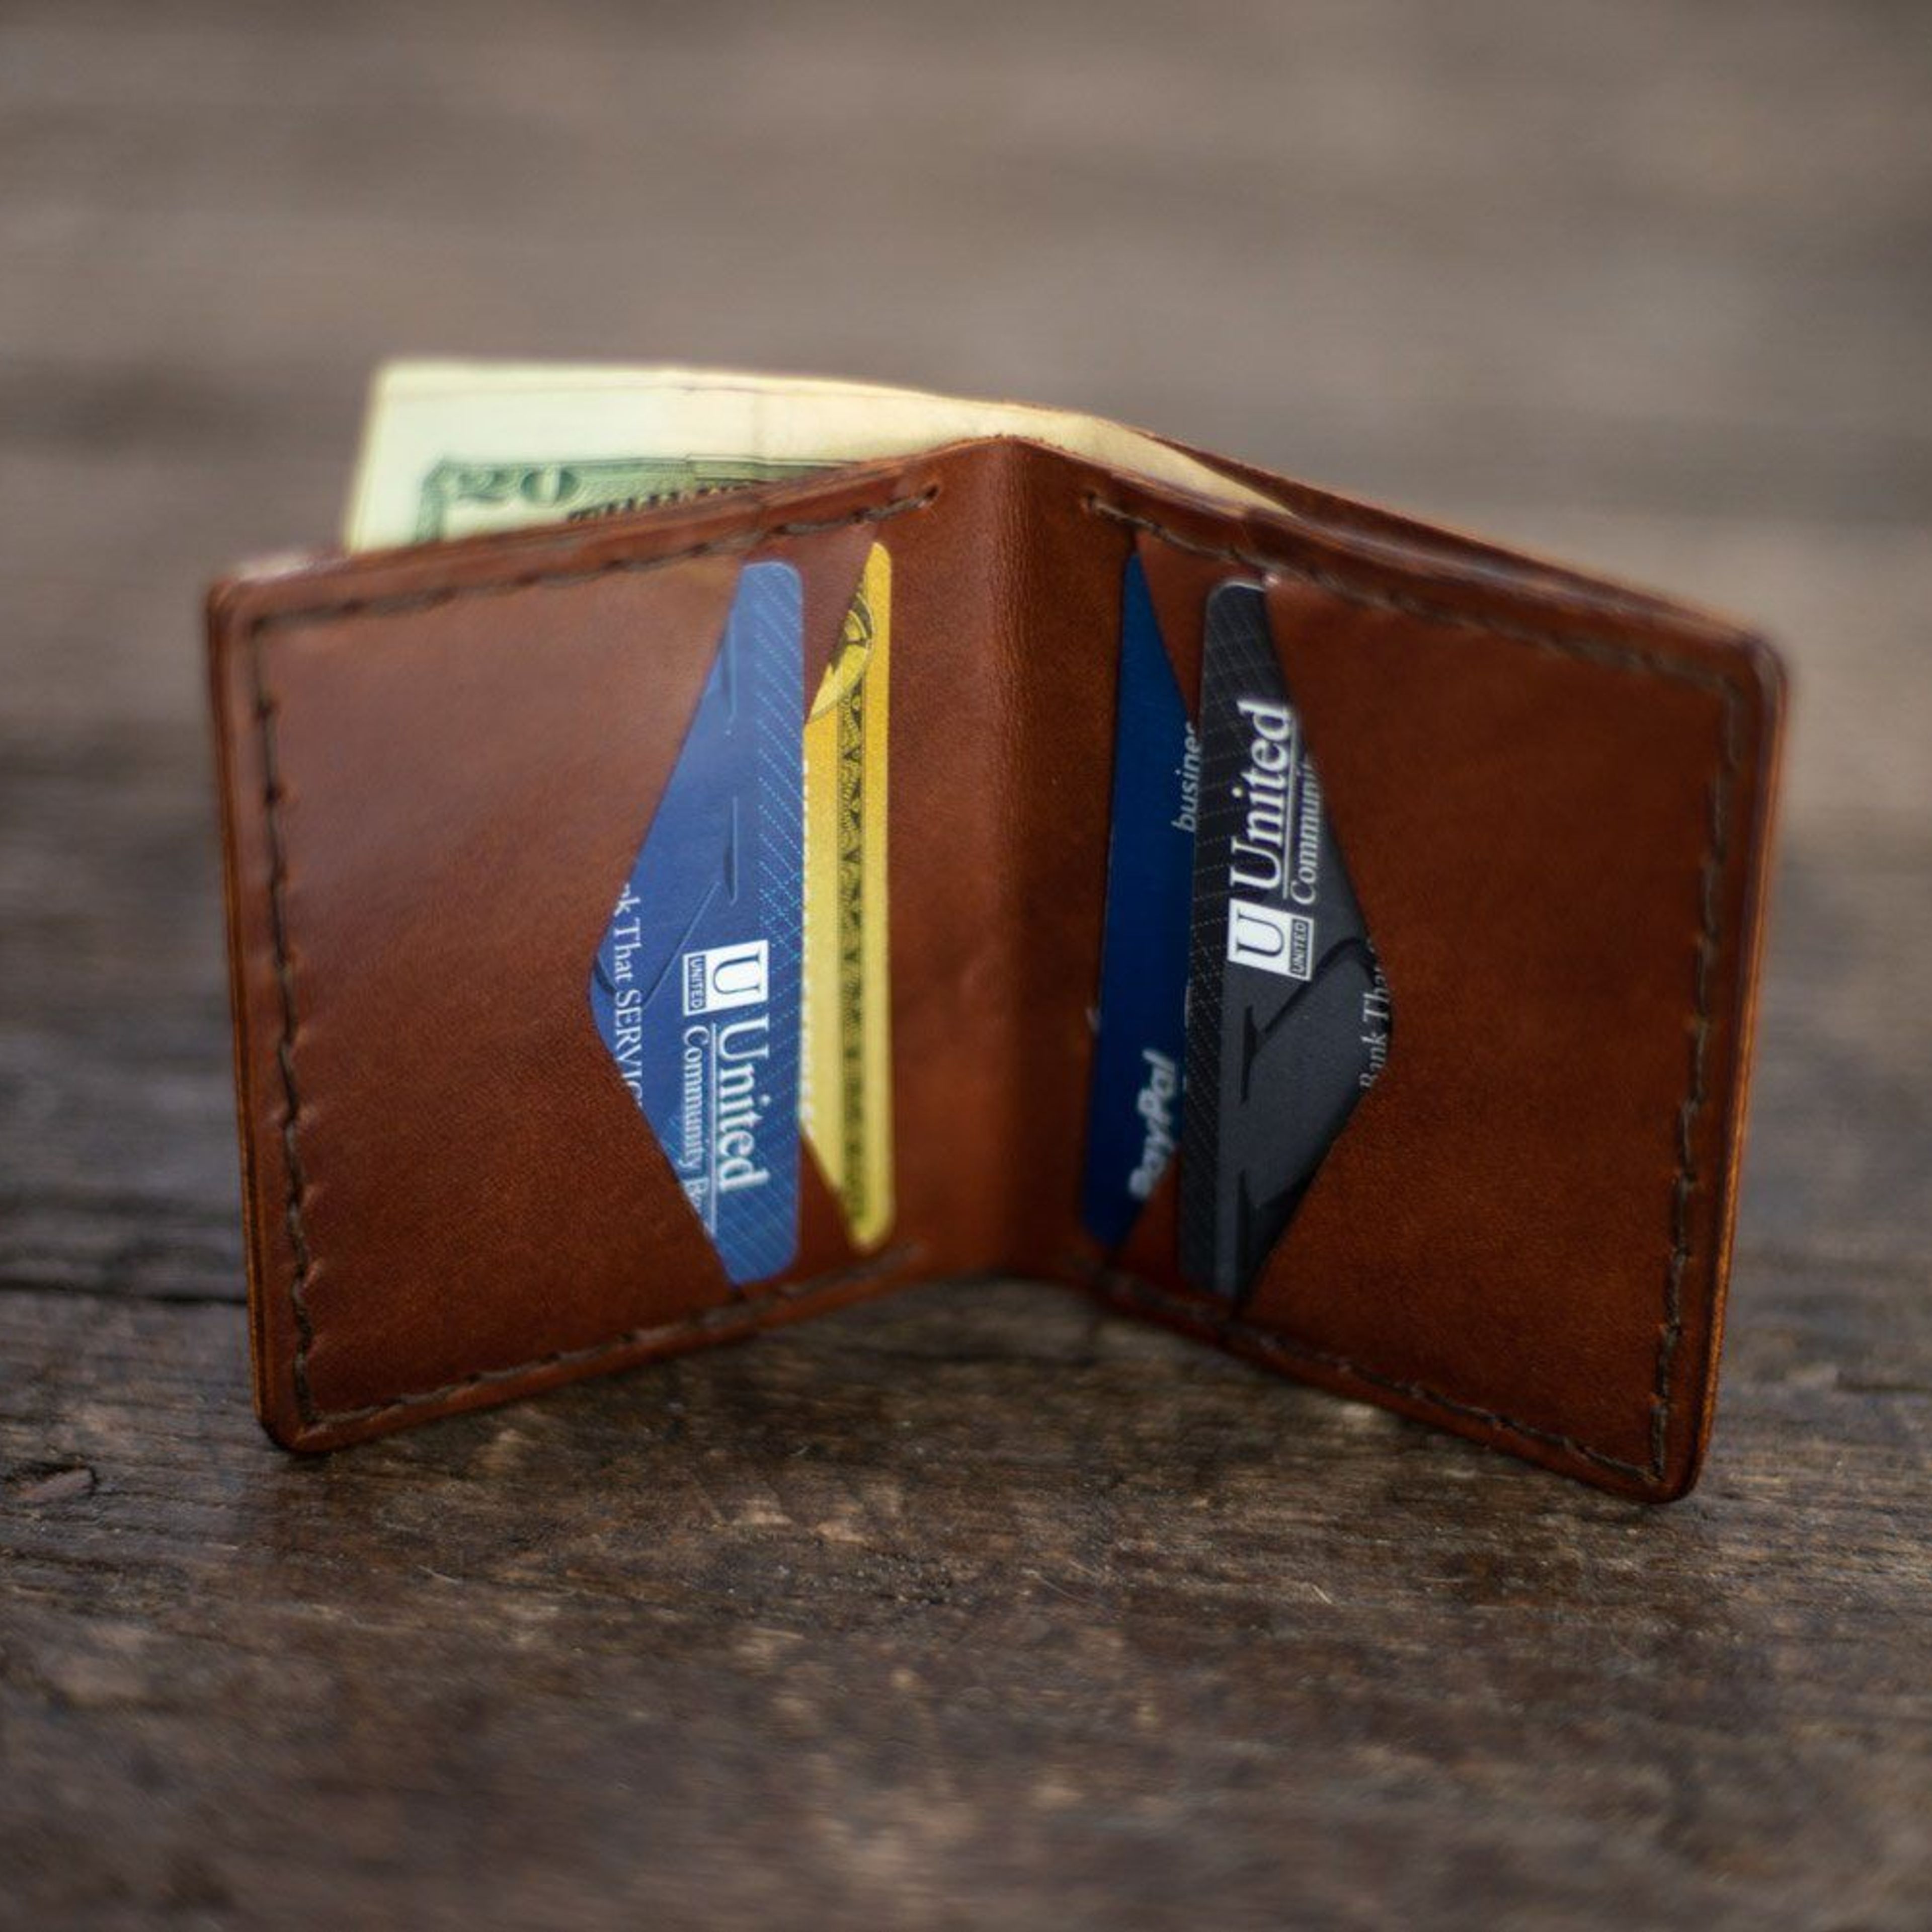 Single Deluxe Leather Wallet